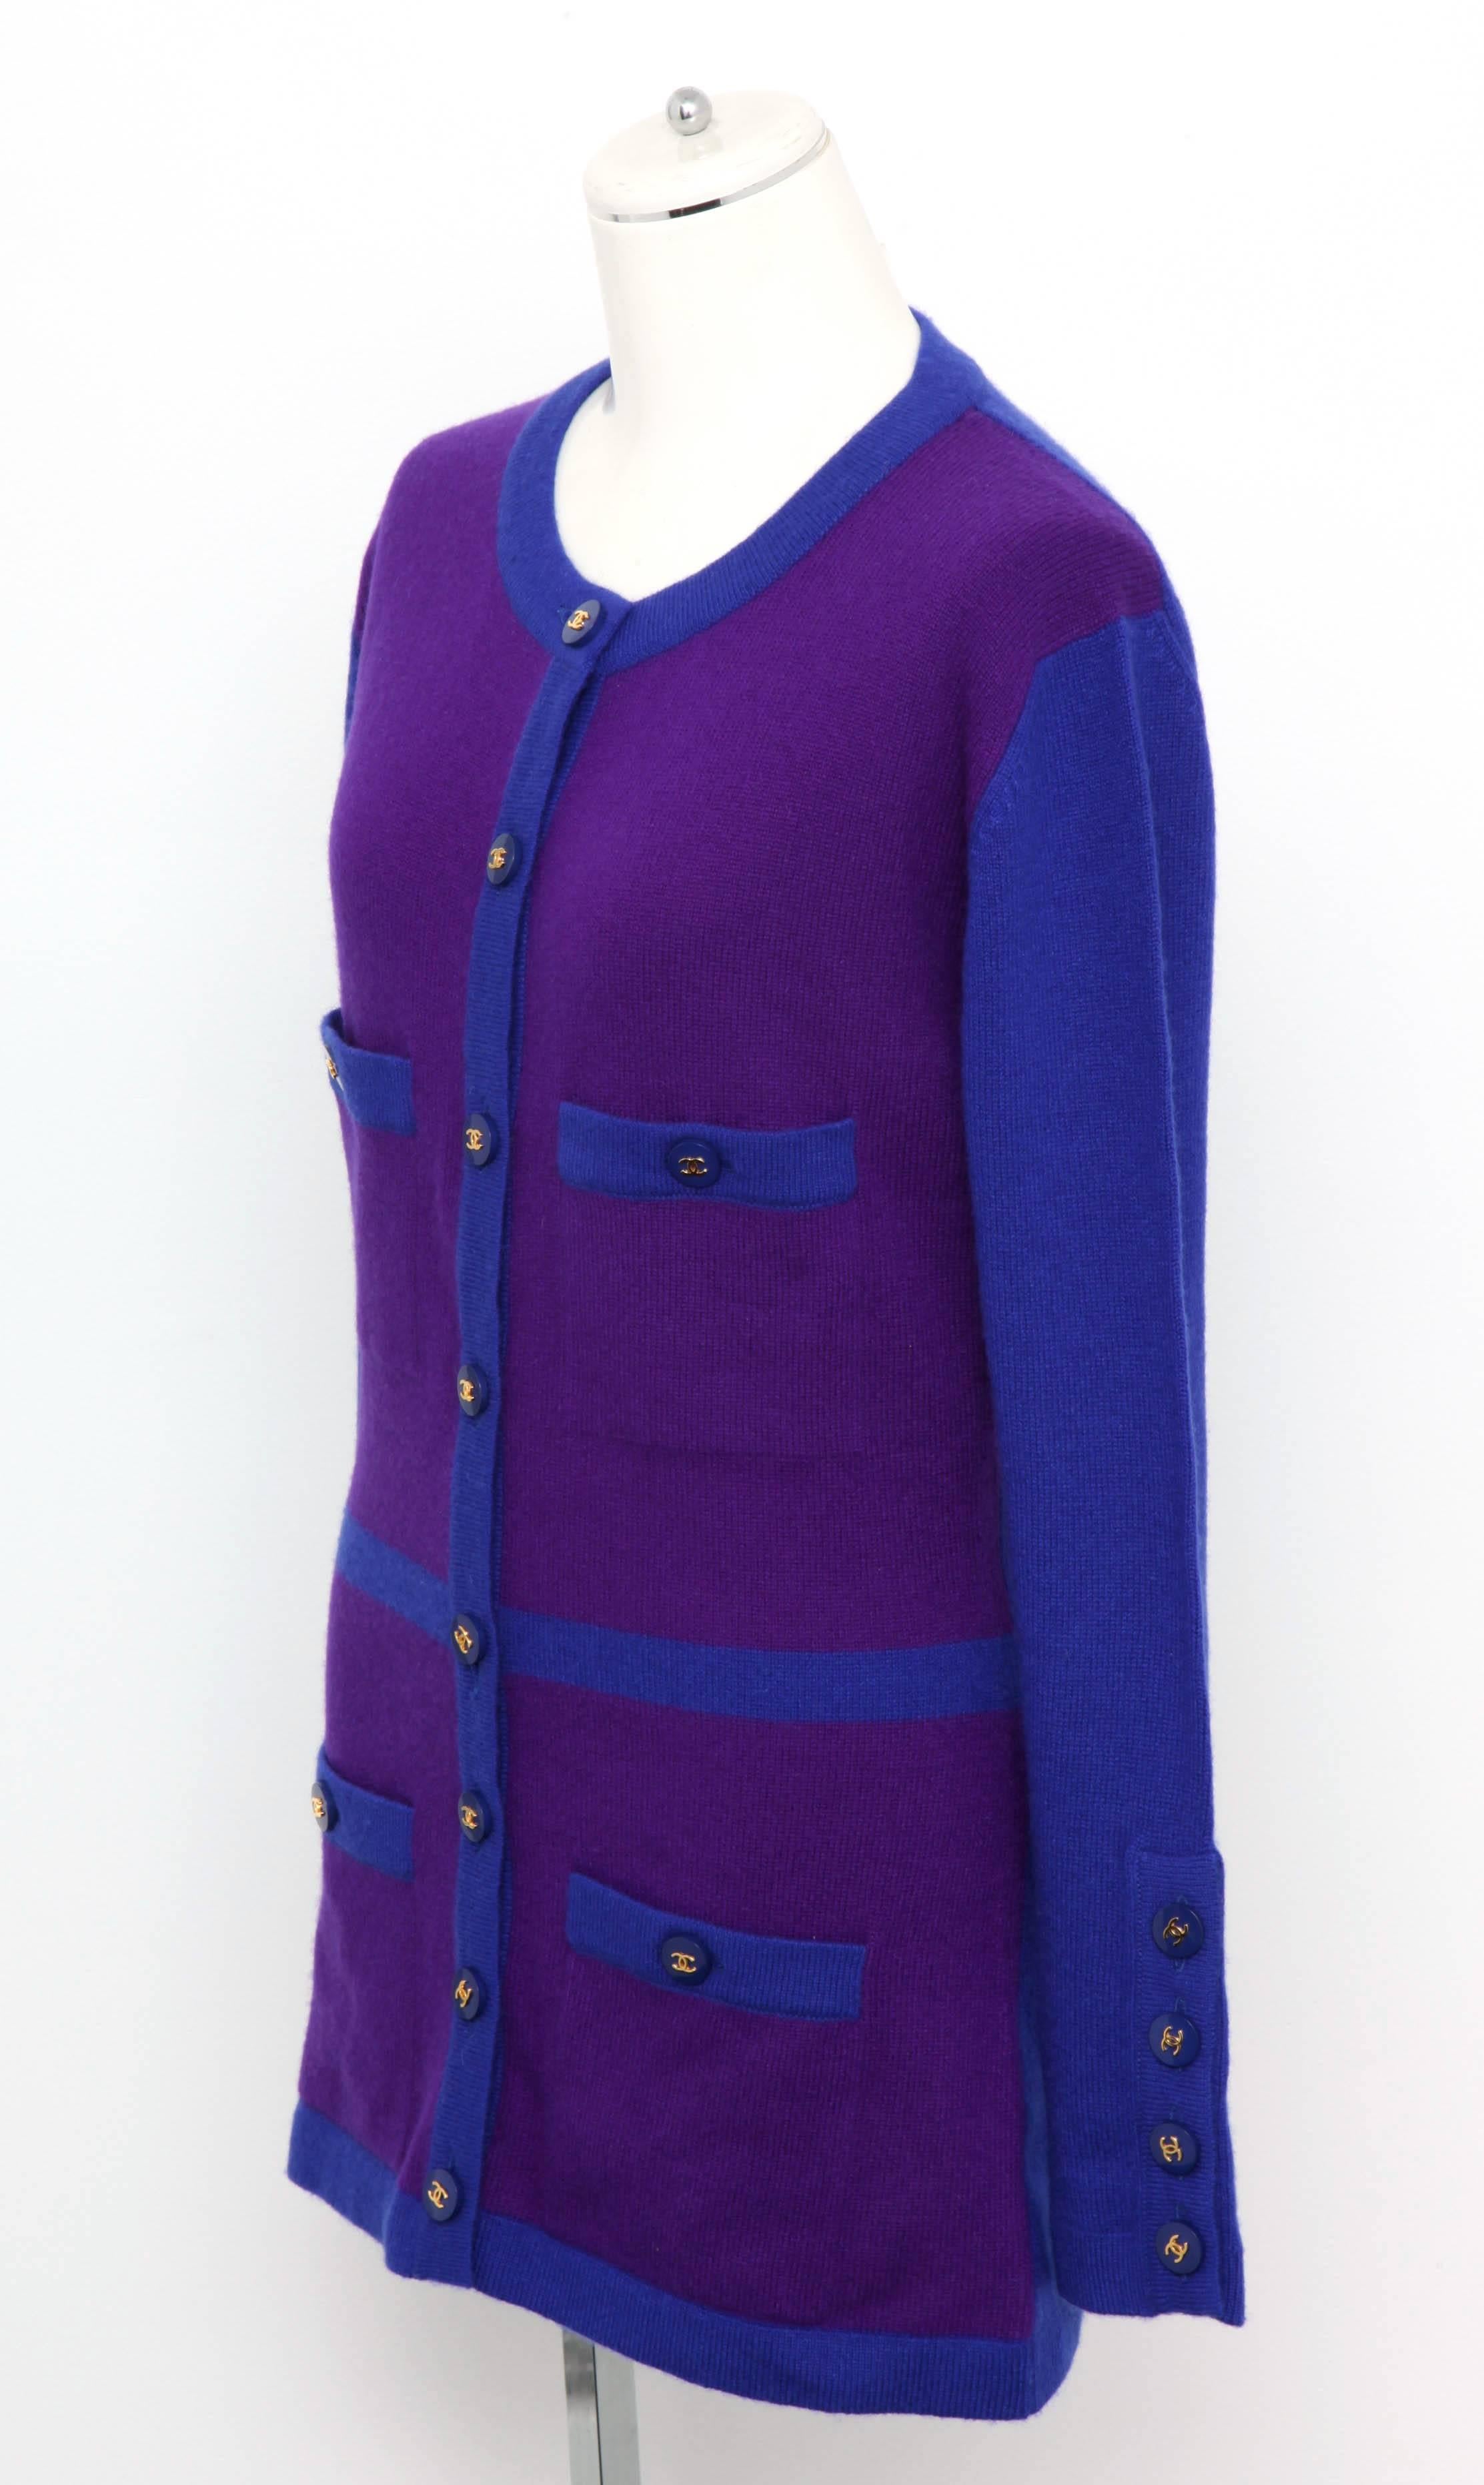 Purple Chanel Cashmere Cardigan Sweater with CC Buttons, 1990s